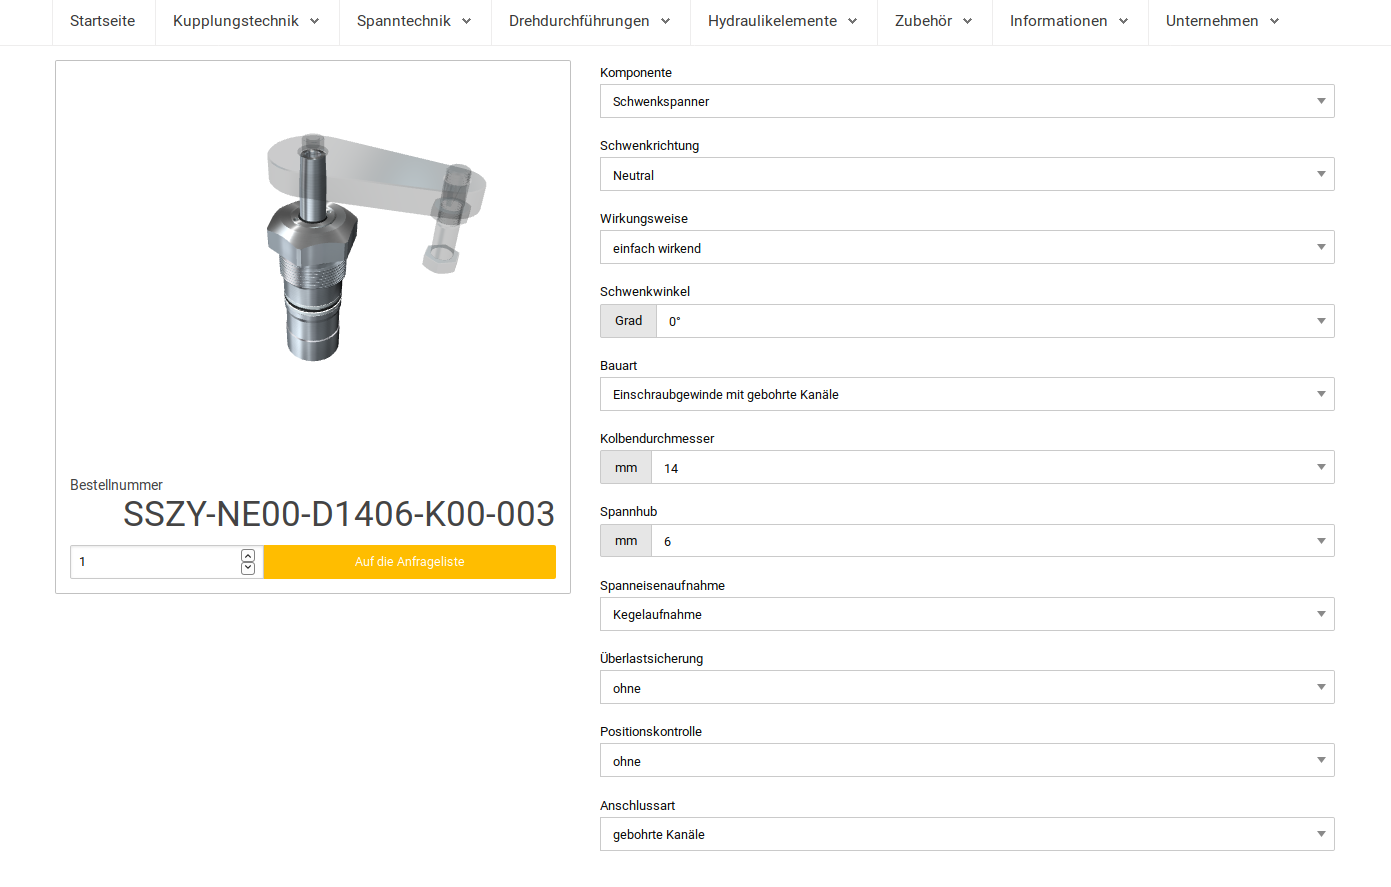 3D configurator fully integrated into the website